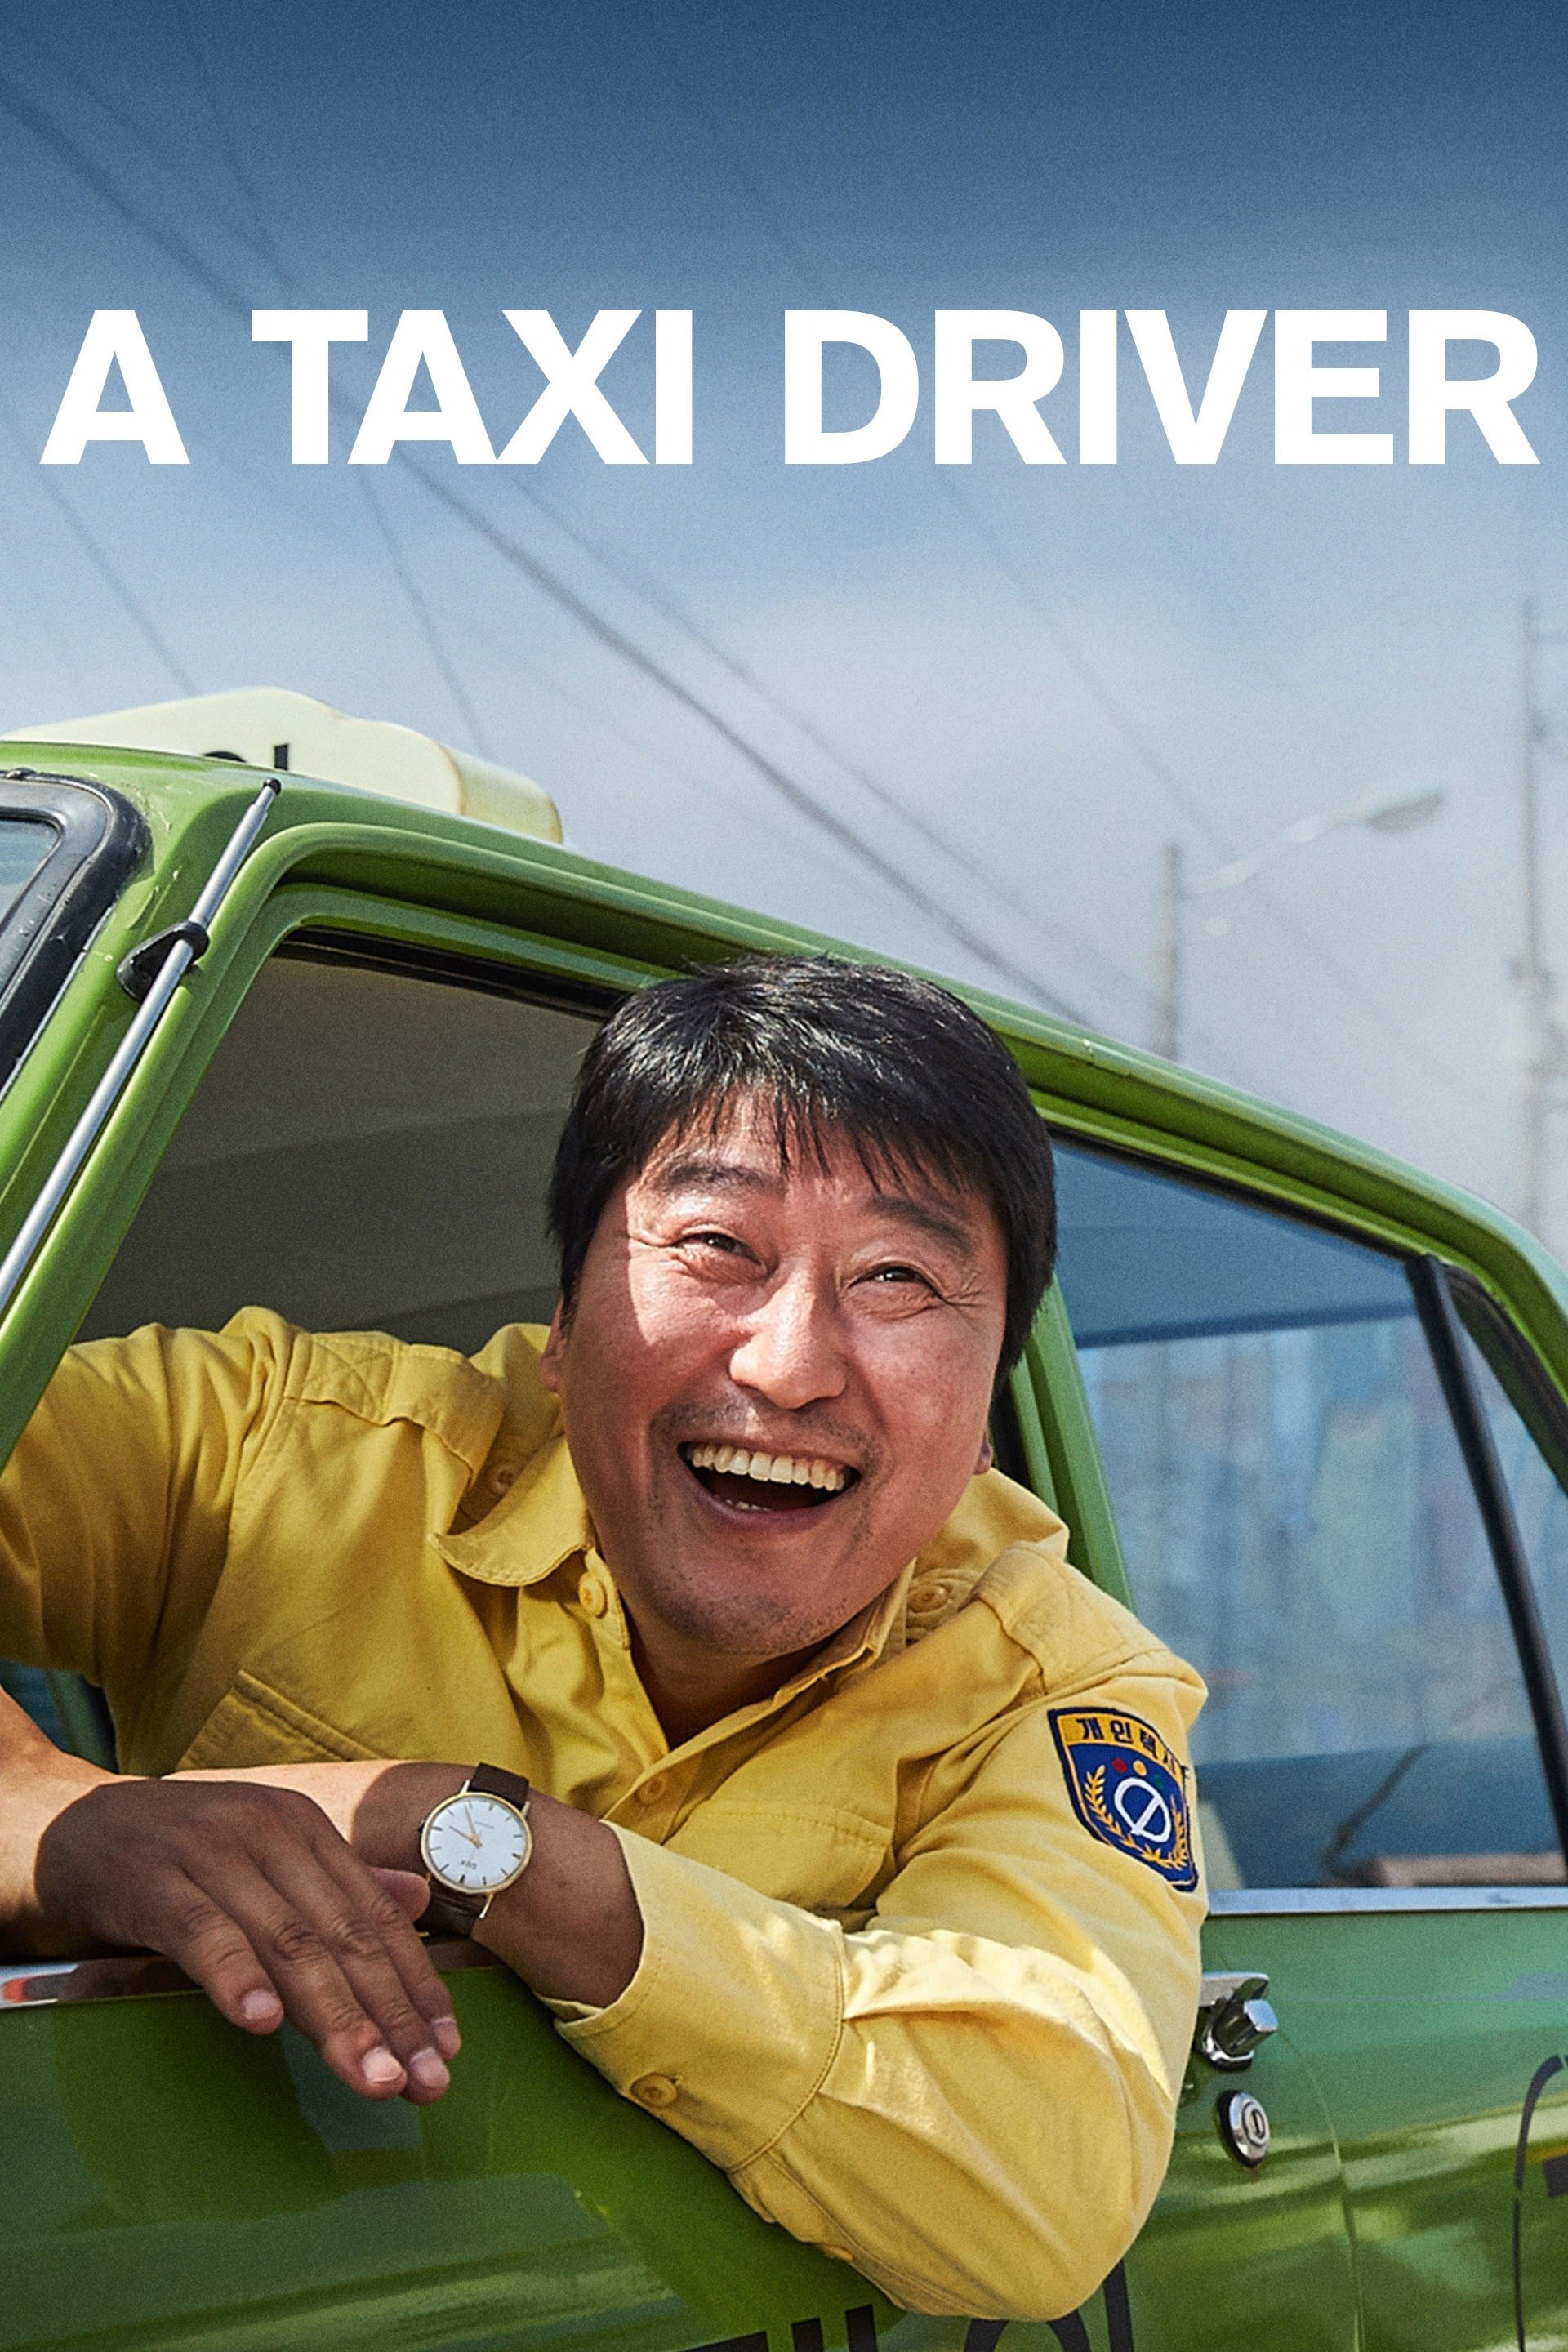 what is a taxi driver 2017 the movie about